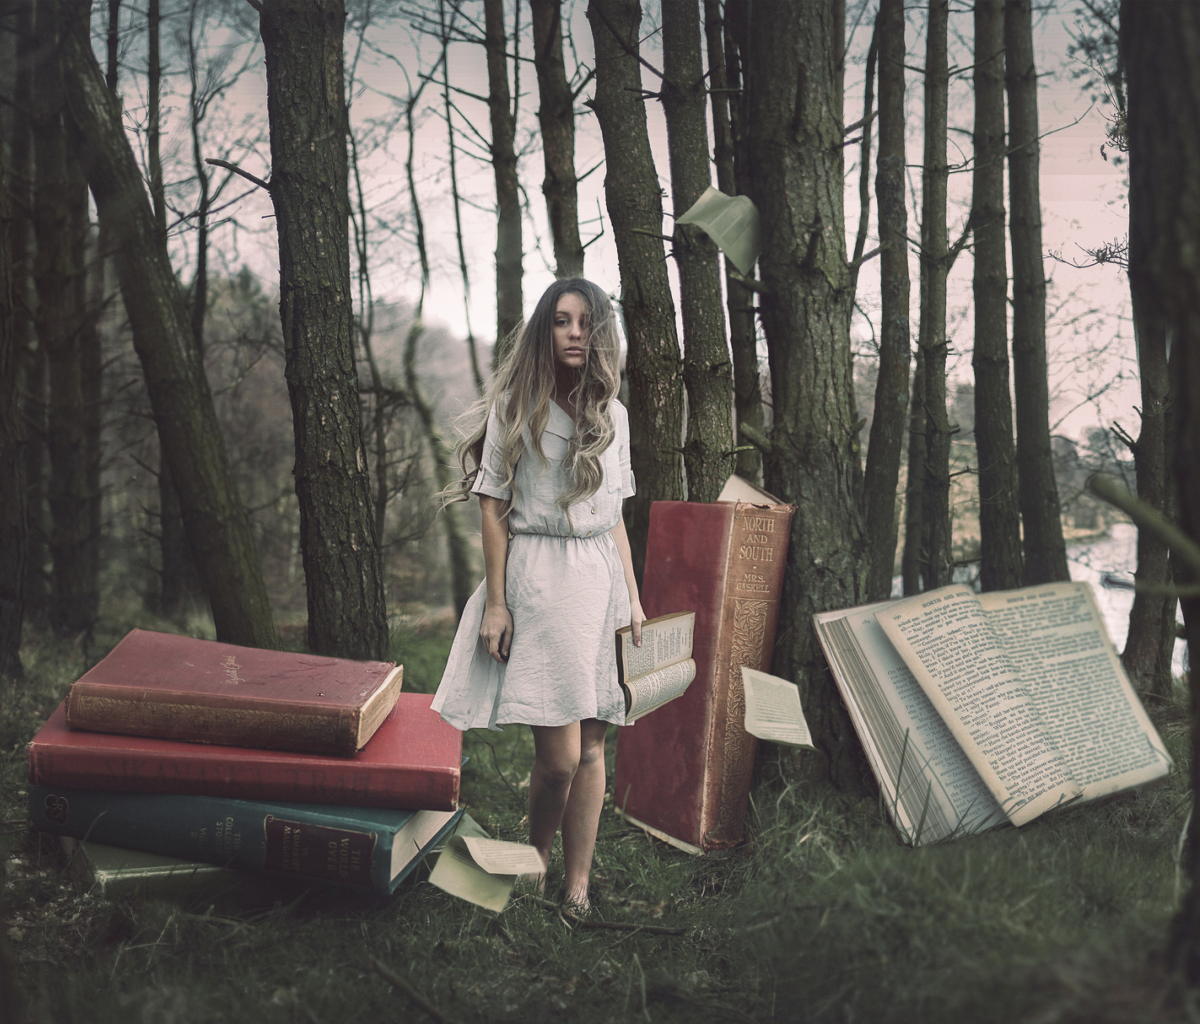 Forest Nymph Surrounded By Books screenshot #1 1200x1024